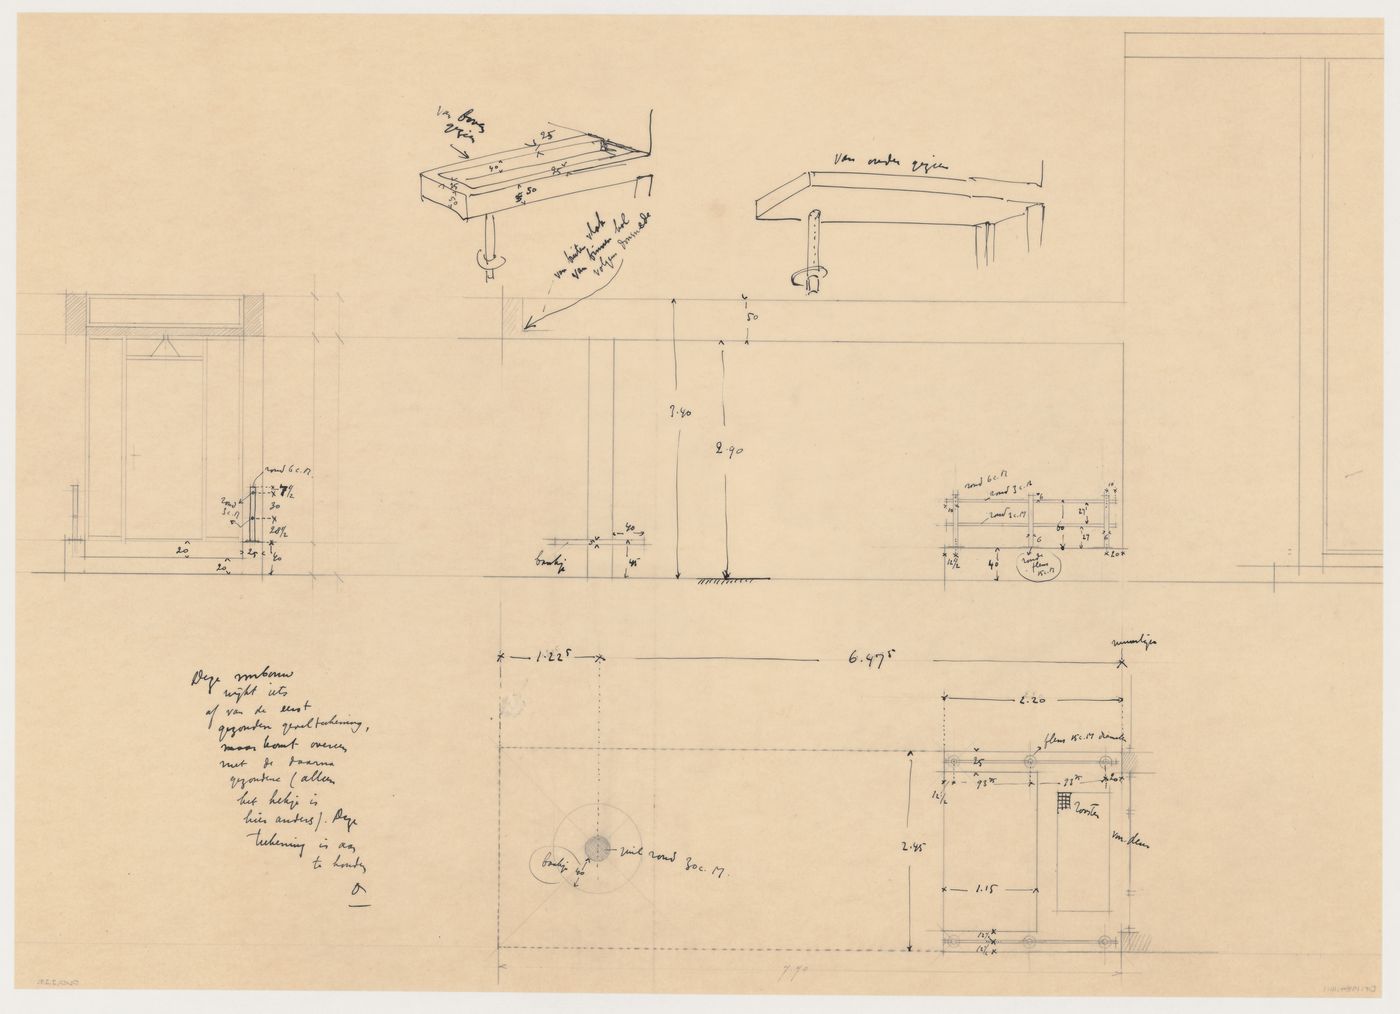 Elevation, plan, and sketch perspectives for a portico for Johnson House, Pinehurst, North Carolina